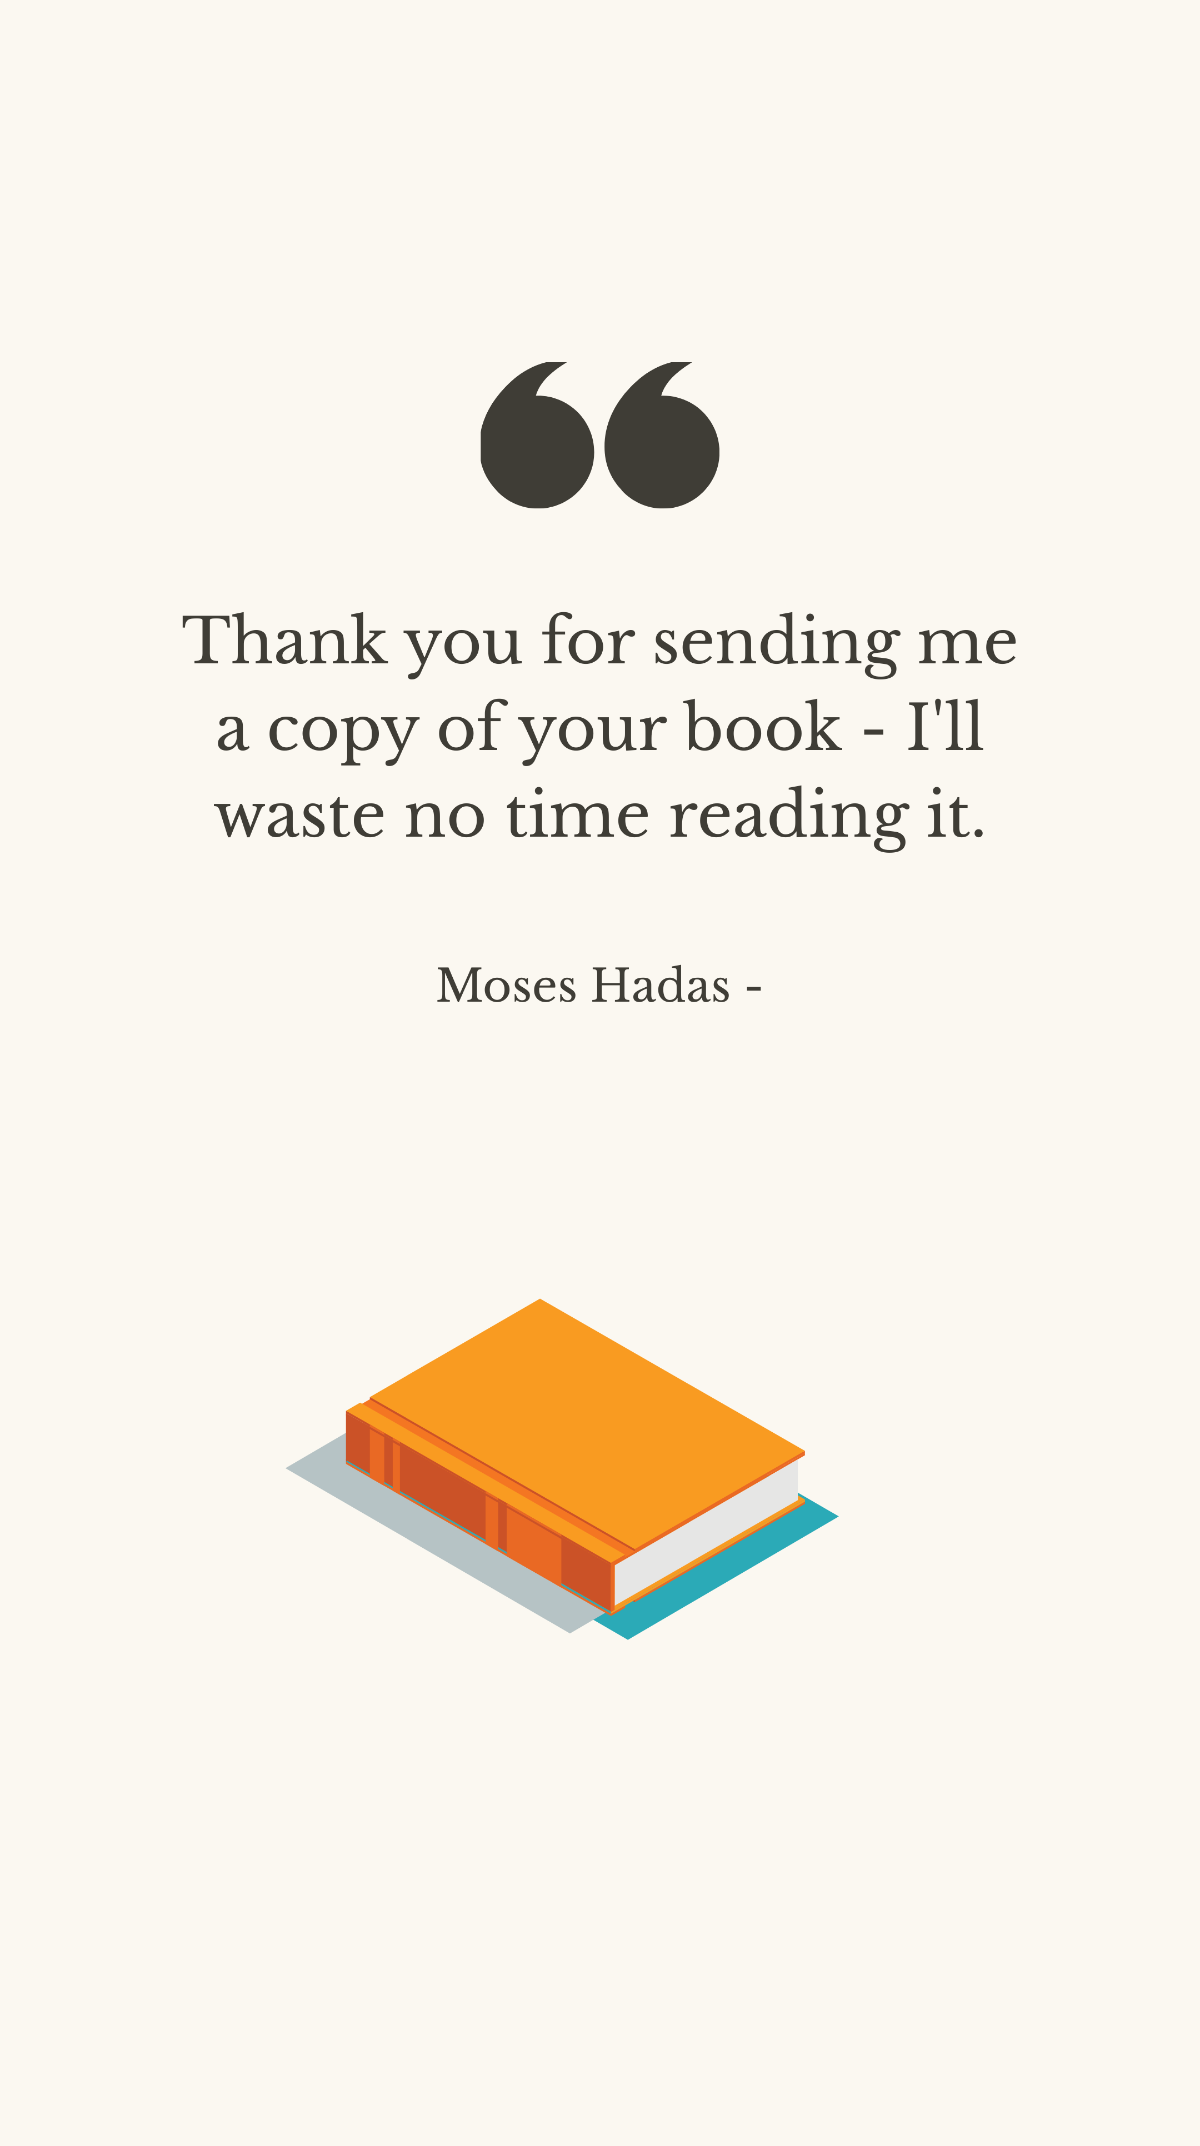 Free Moses Hadas - Thank you for sending me a copy of your book - I'll waste no time reading it. Template